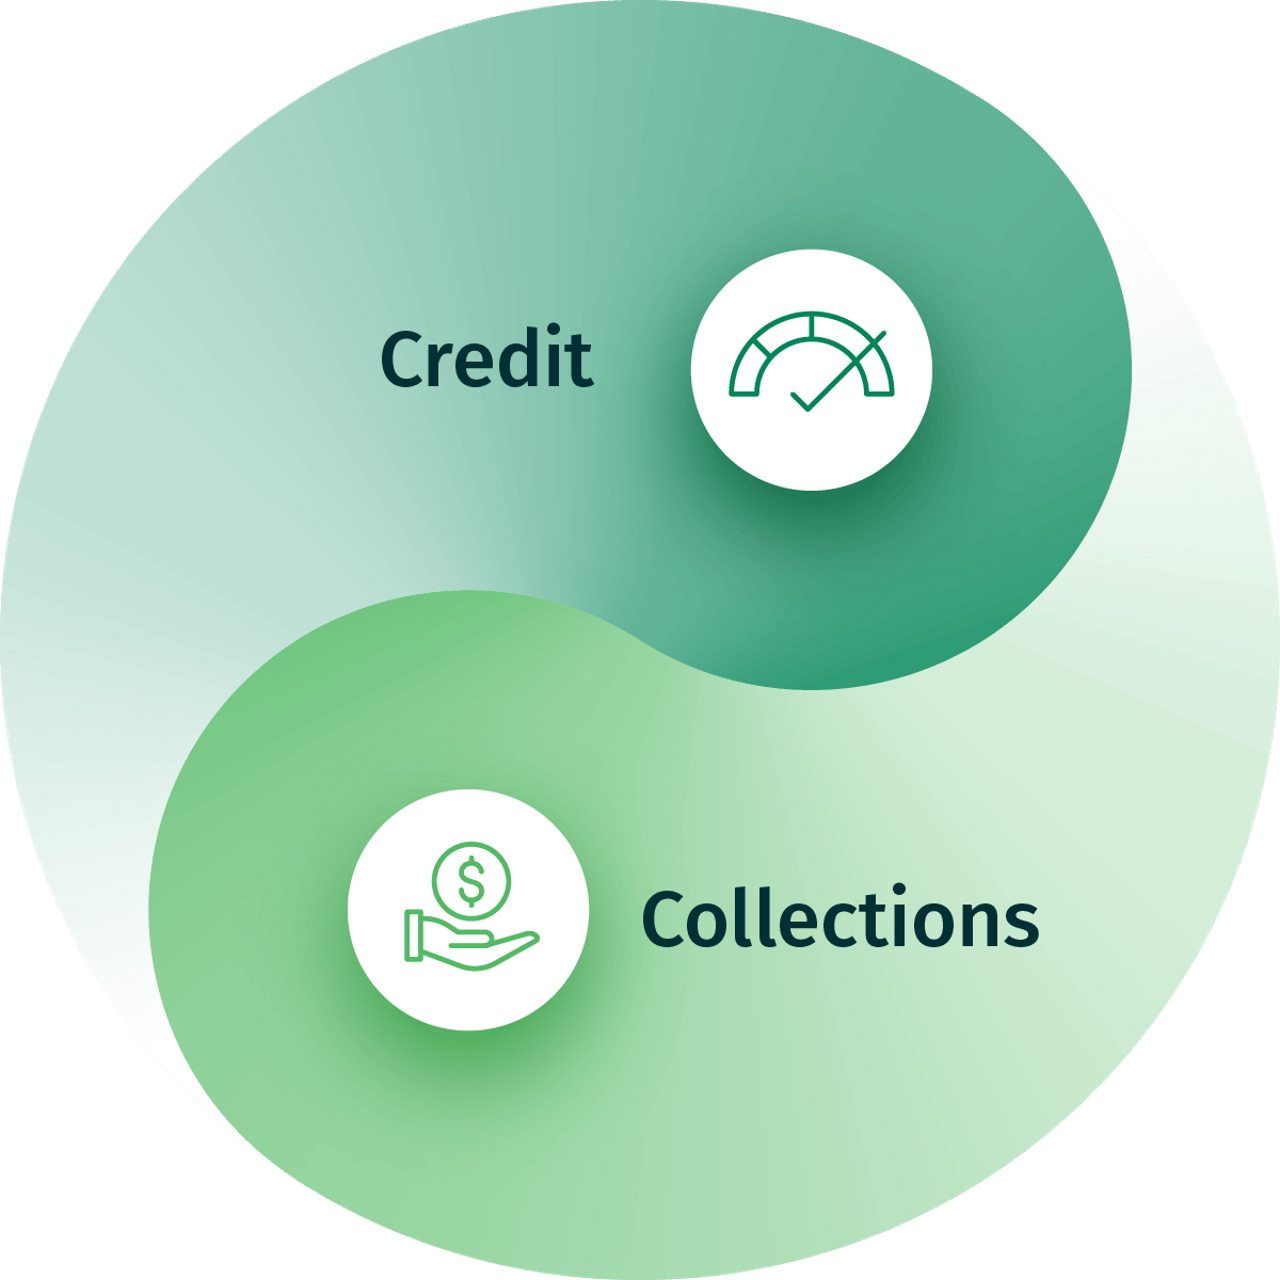 Illustration: Credit and Collections as yin and yang